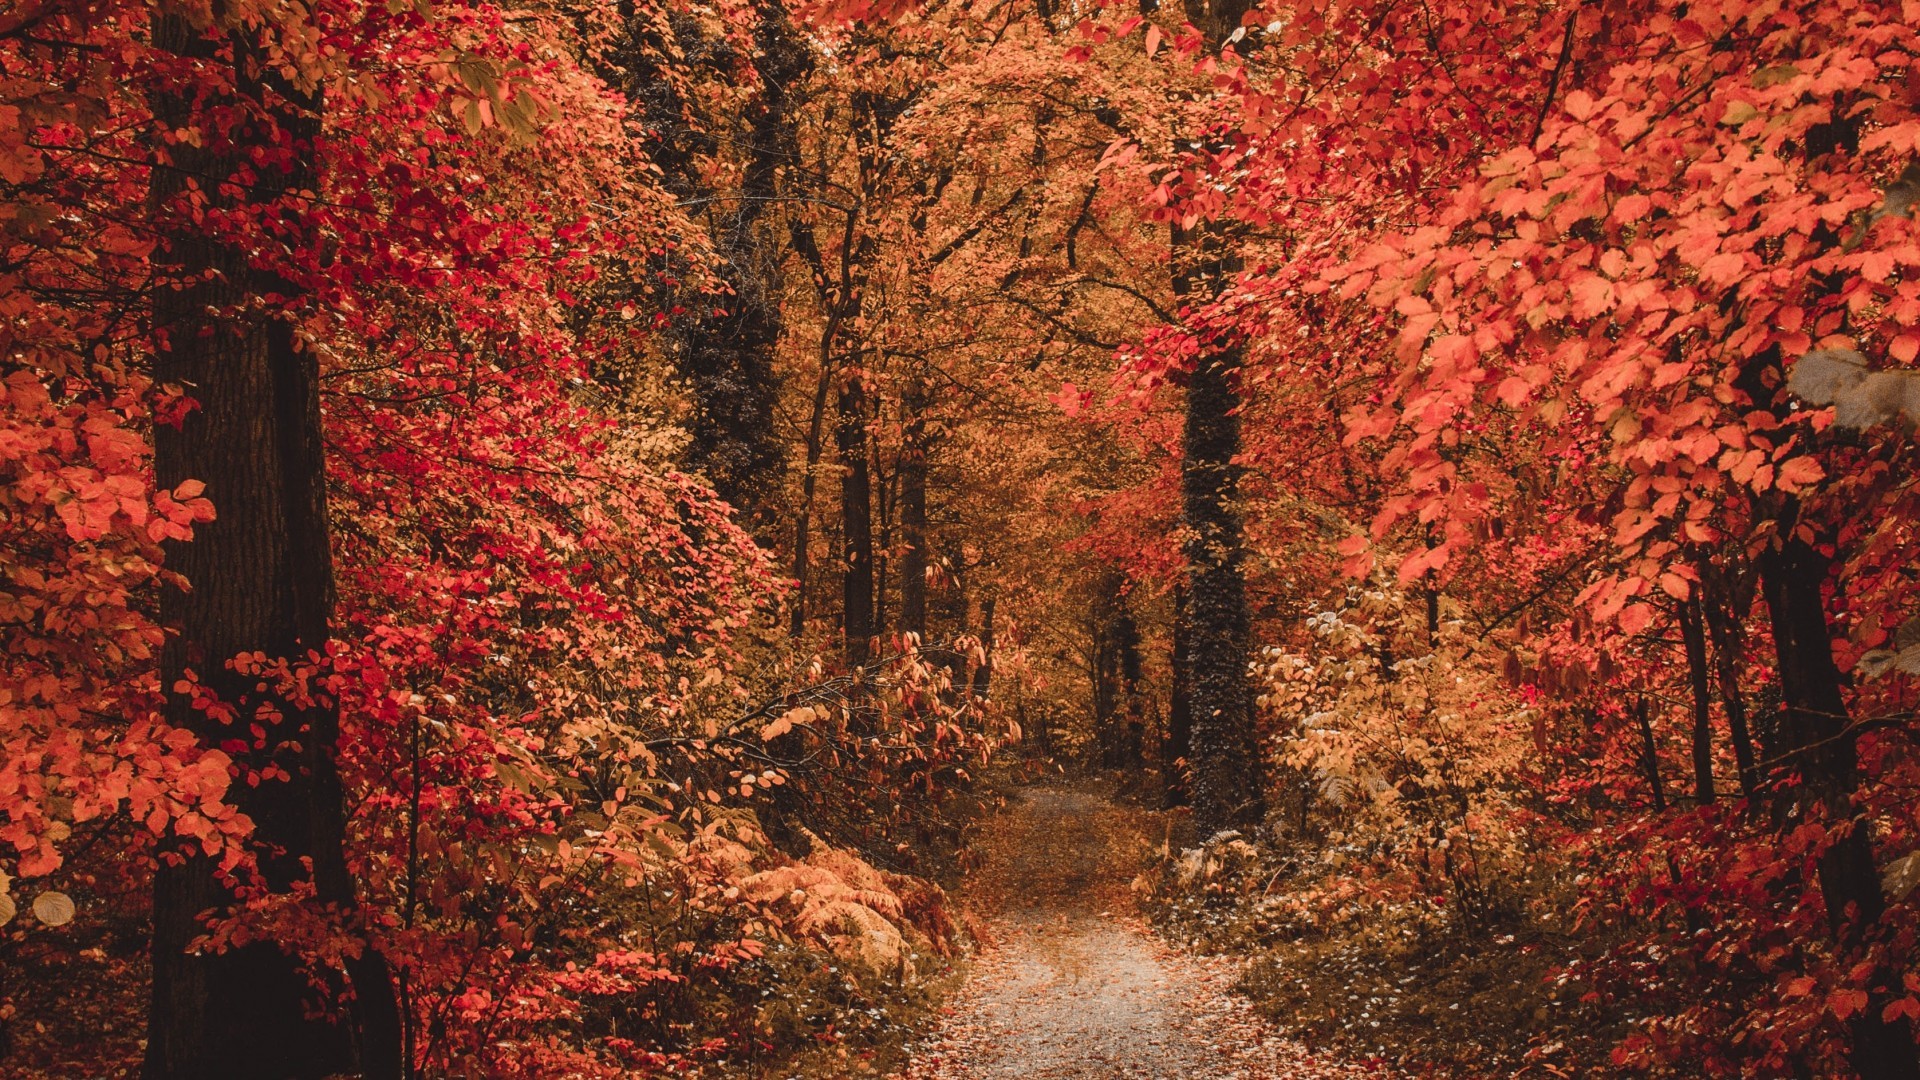 Forest, Colorful Leaves, Fall, Path, Autumn - Autumn Forest - HD Wallpaper 